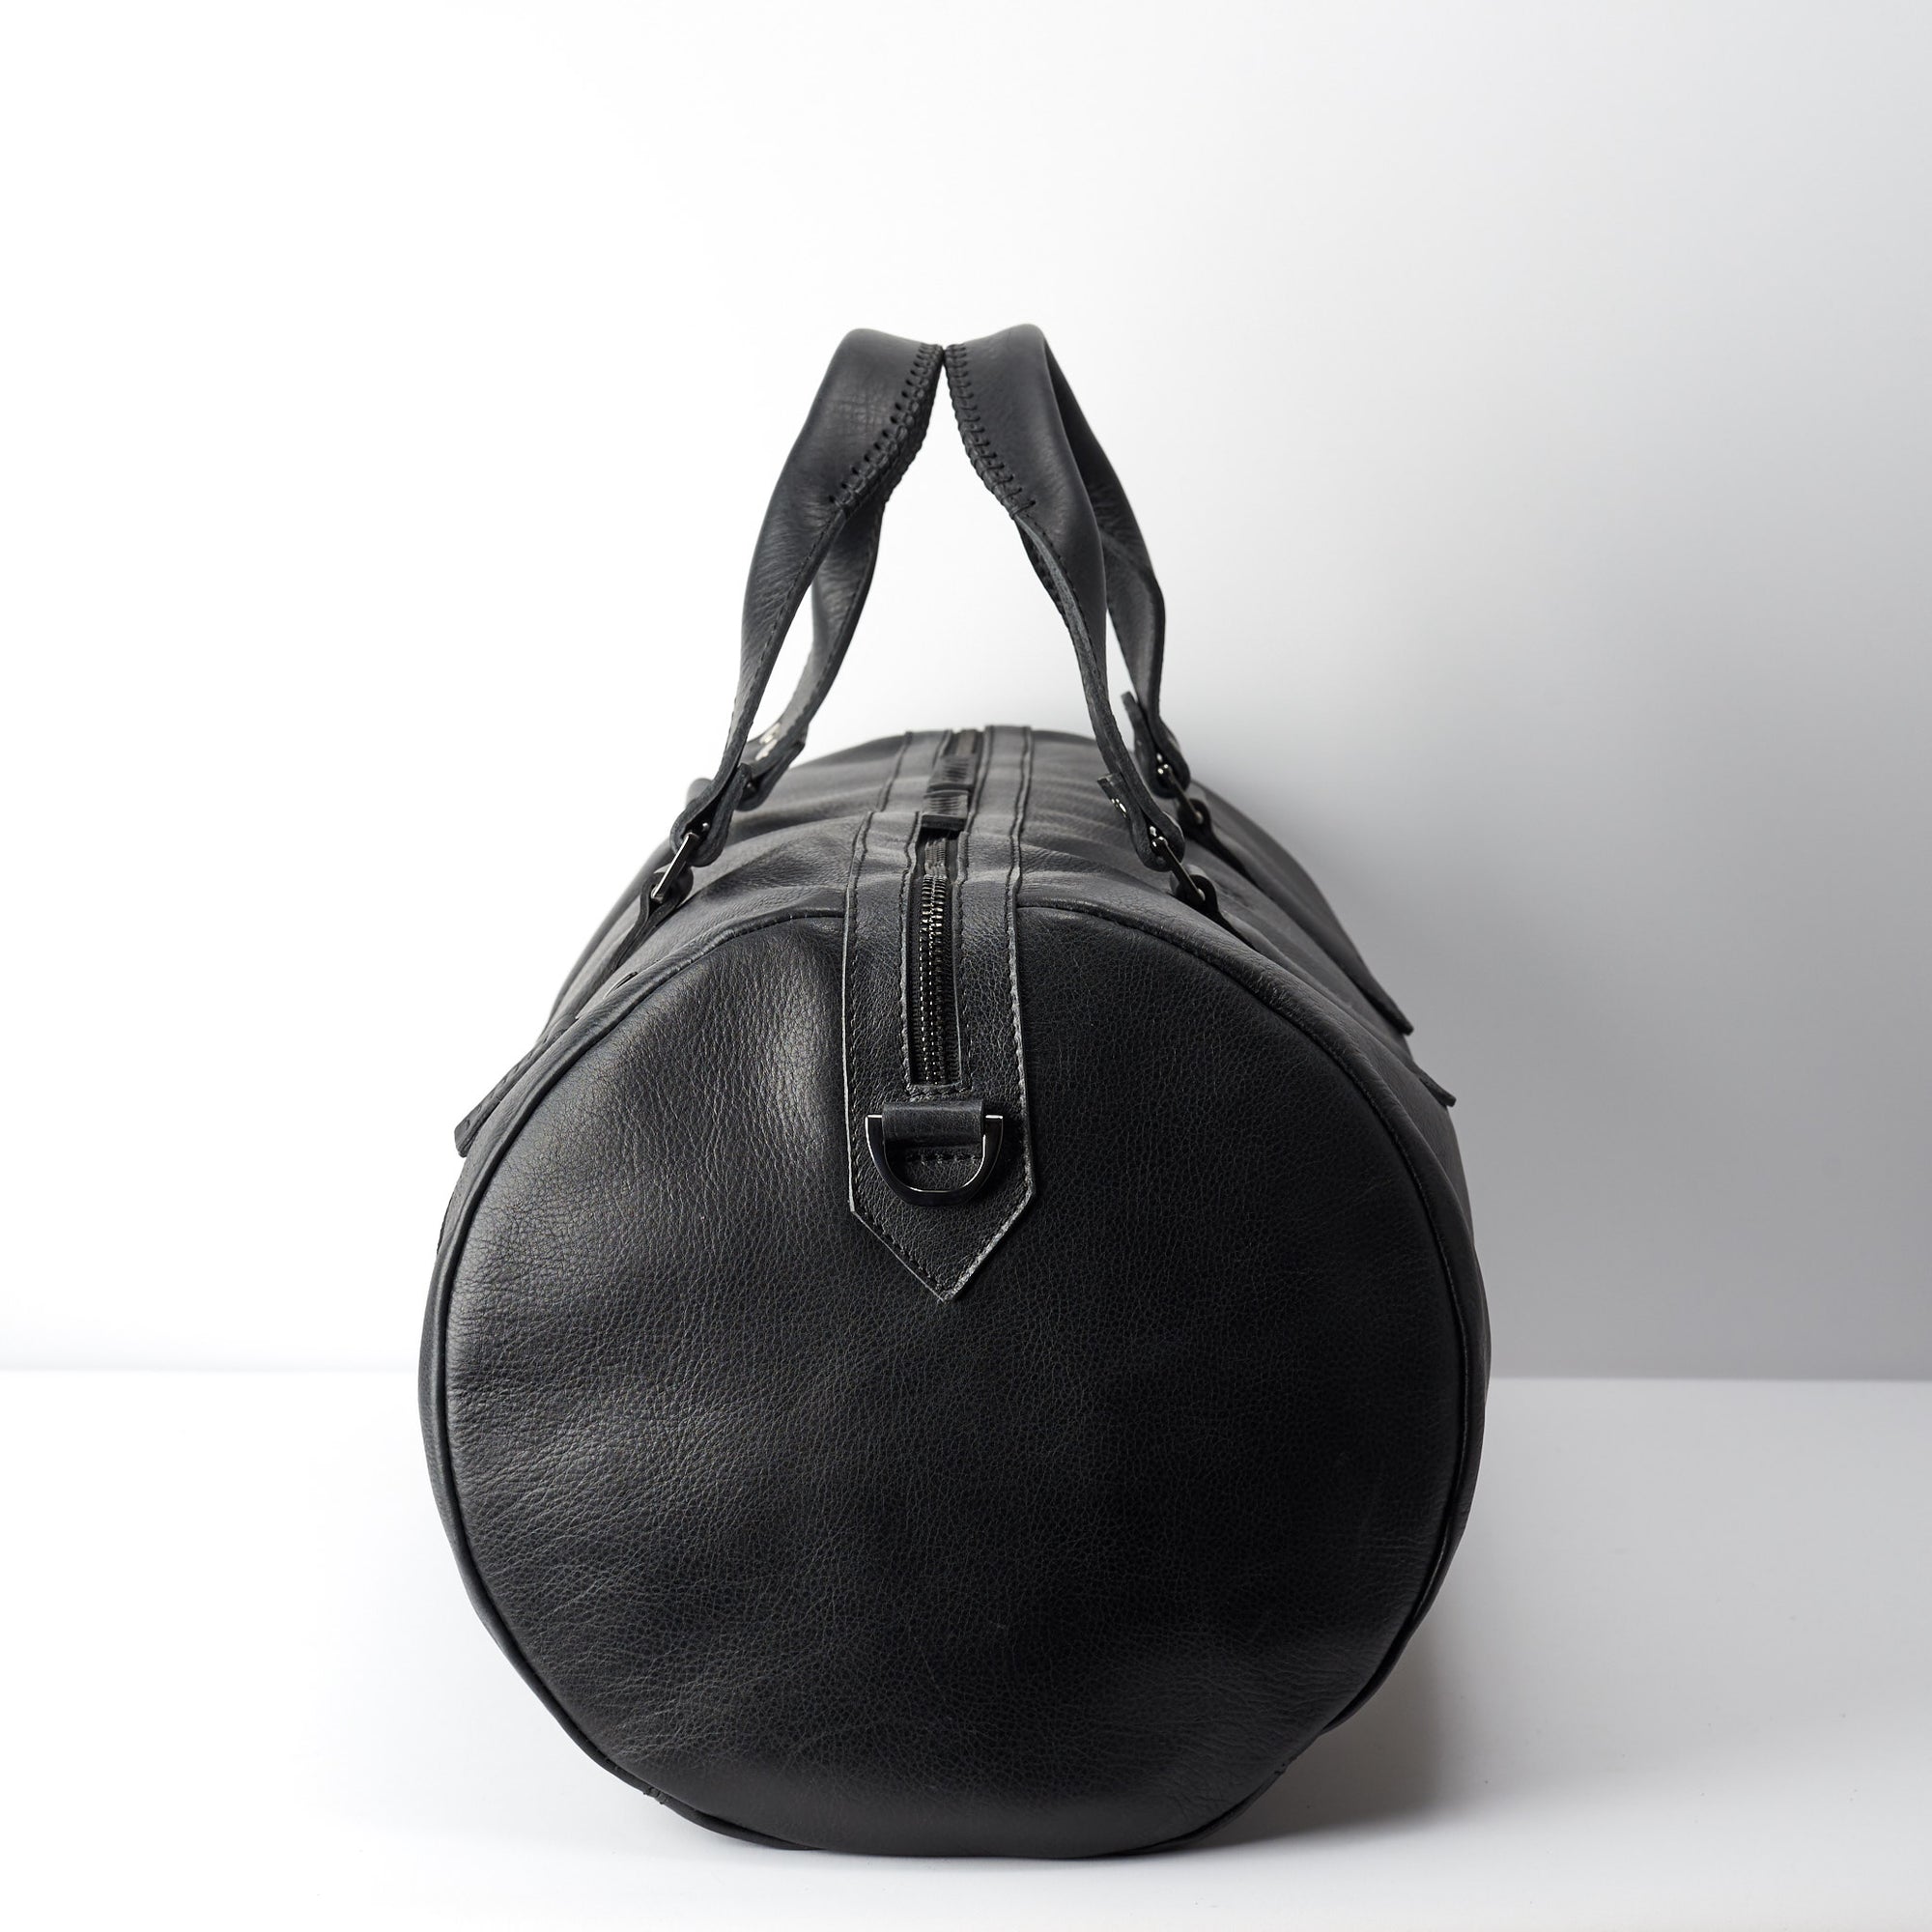 Angle. Handmade black leather holdall bag for mens gifts